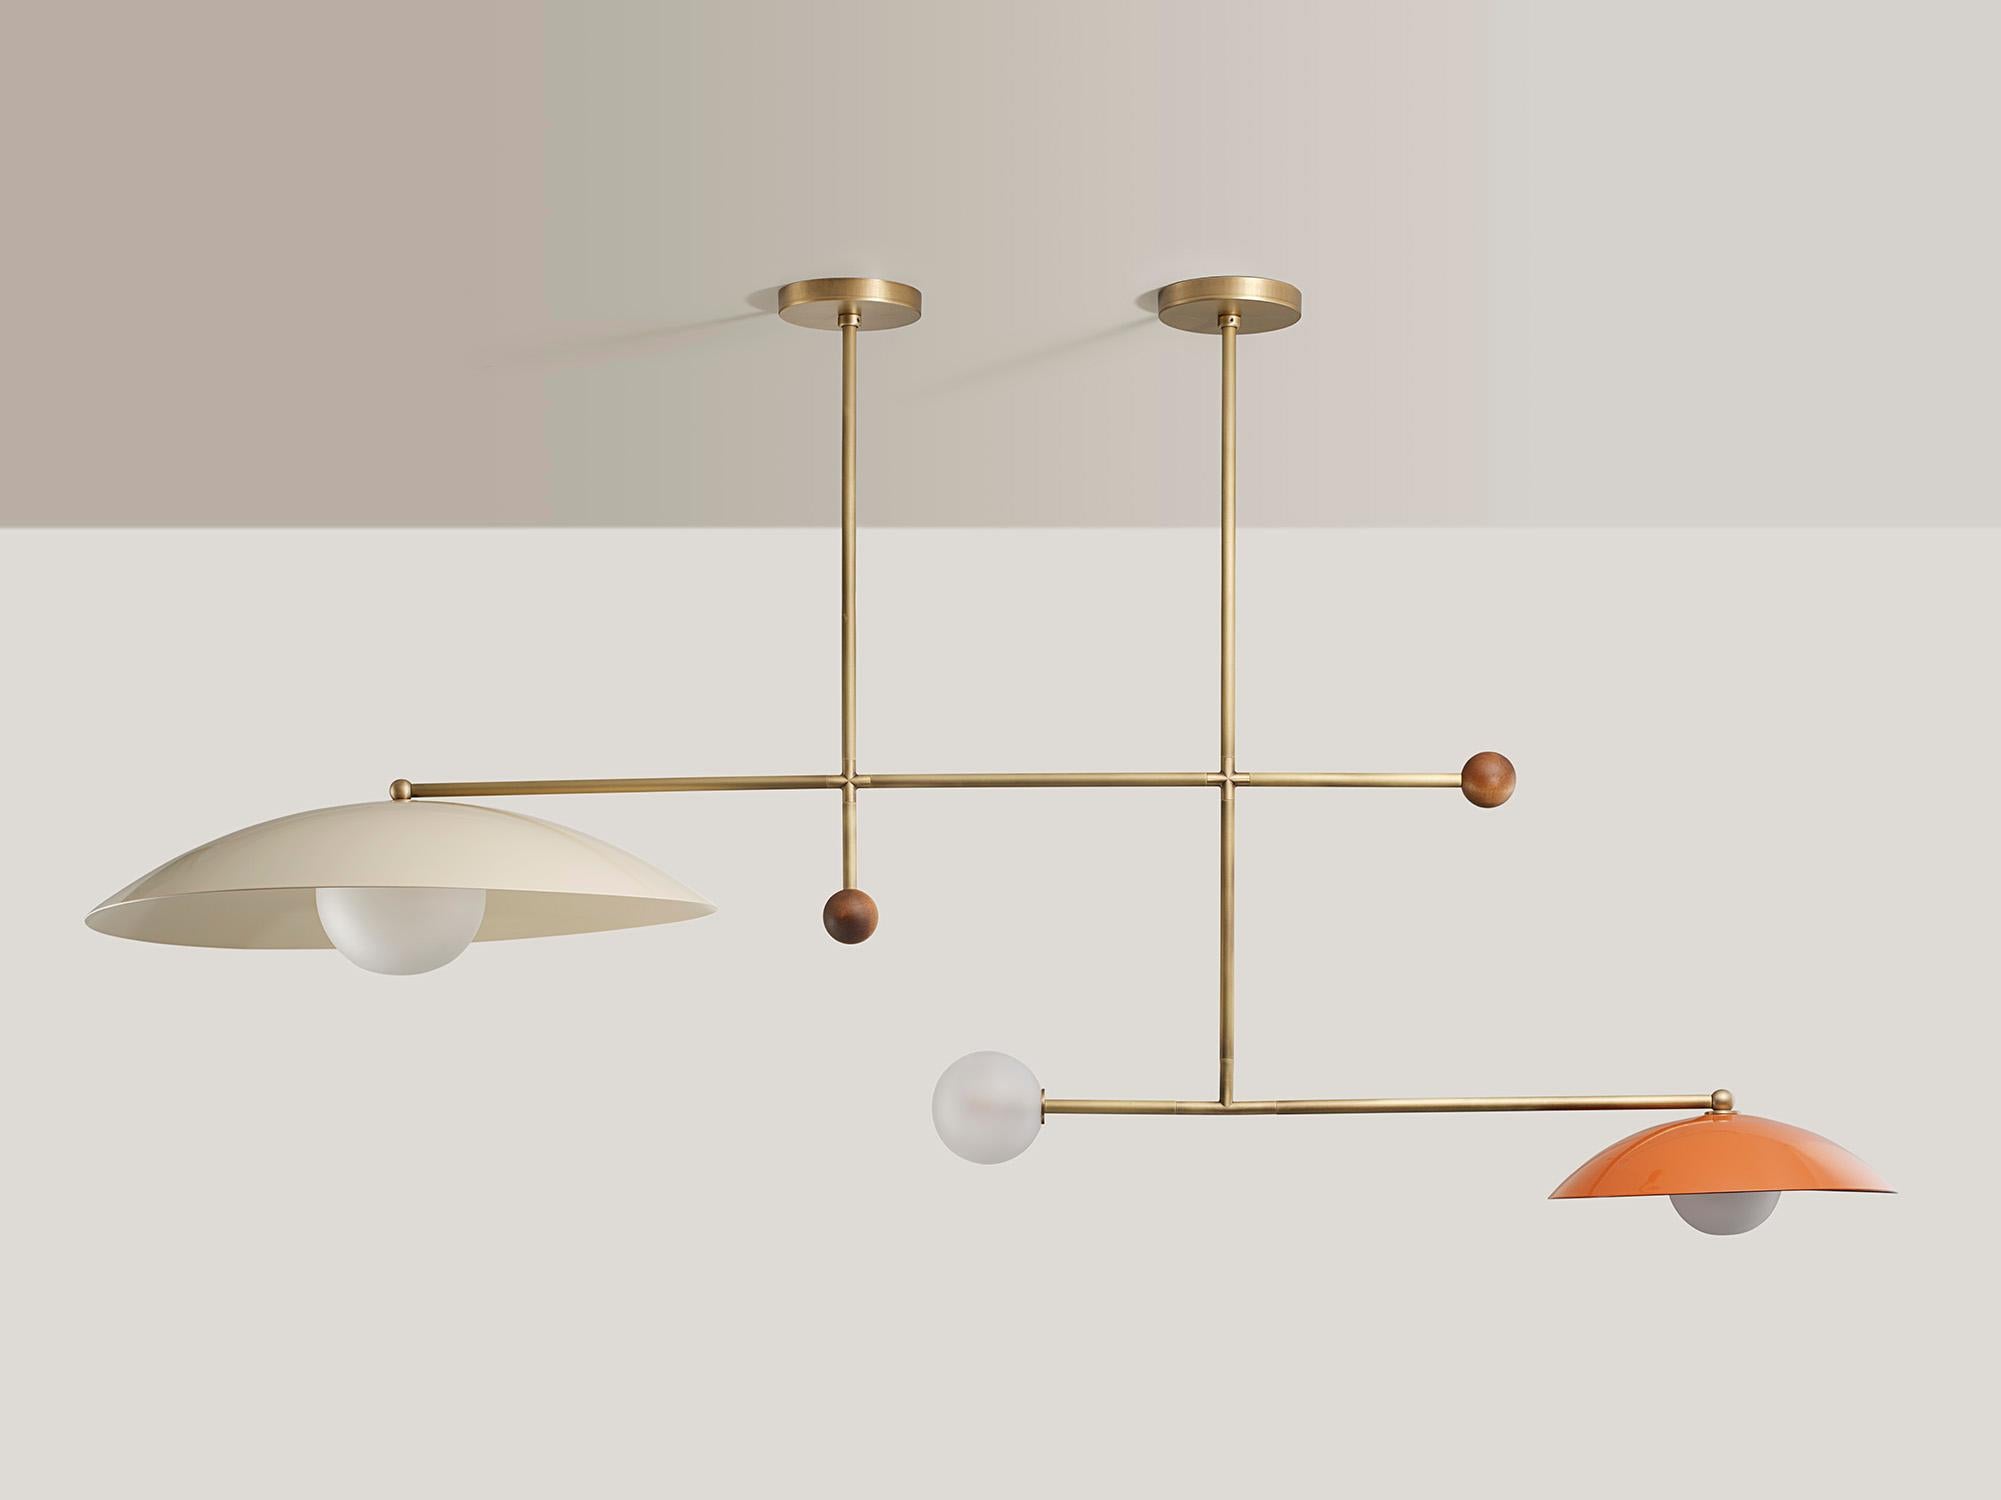 VERSO Chandelier in Enamel, Brass & Walnut, Ginger Curtis x Blueprint Lighting In New Condition For Sale In New York, NY